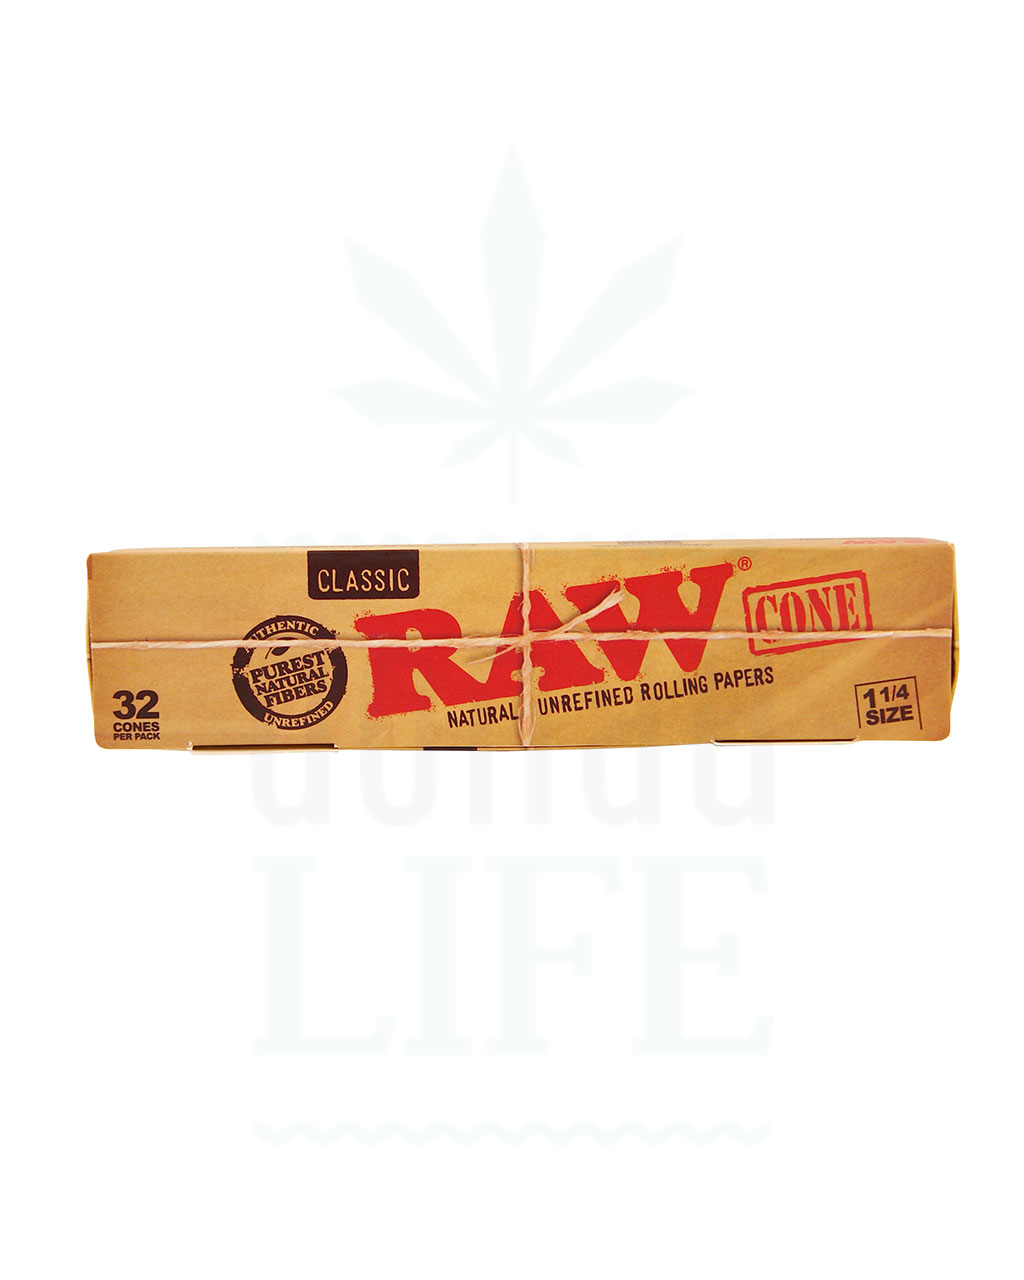 Papers RAW Classic Cones 1 1/4 | 32 Stück